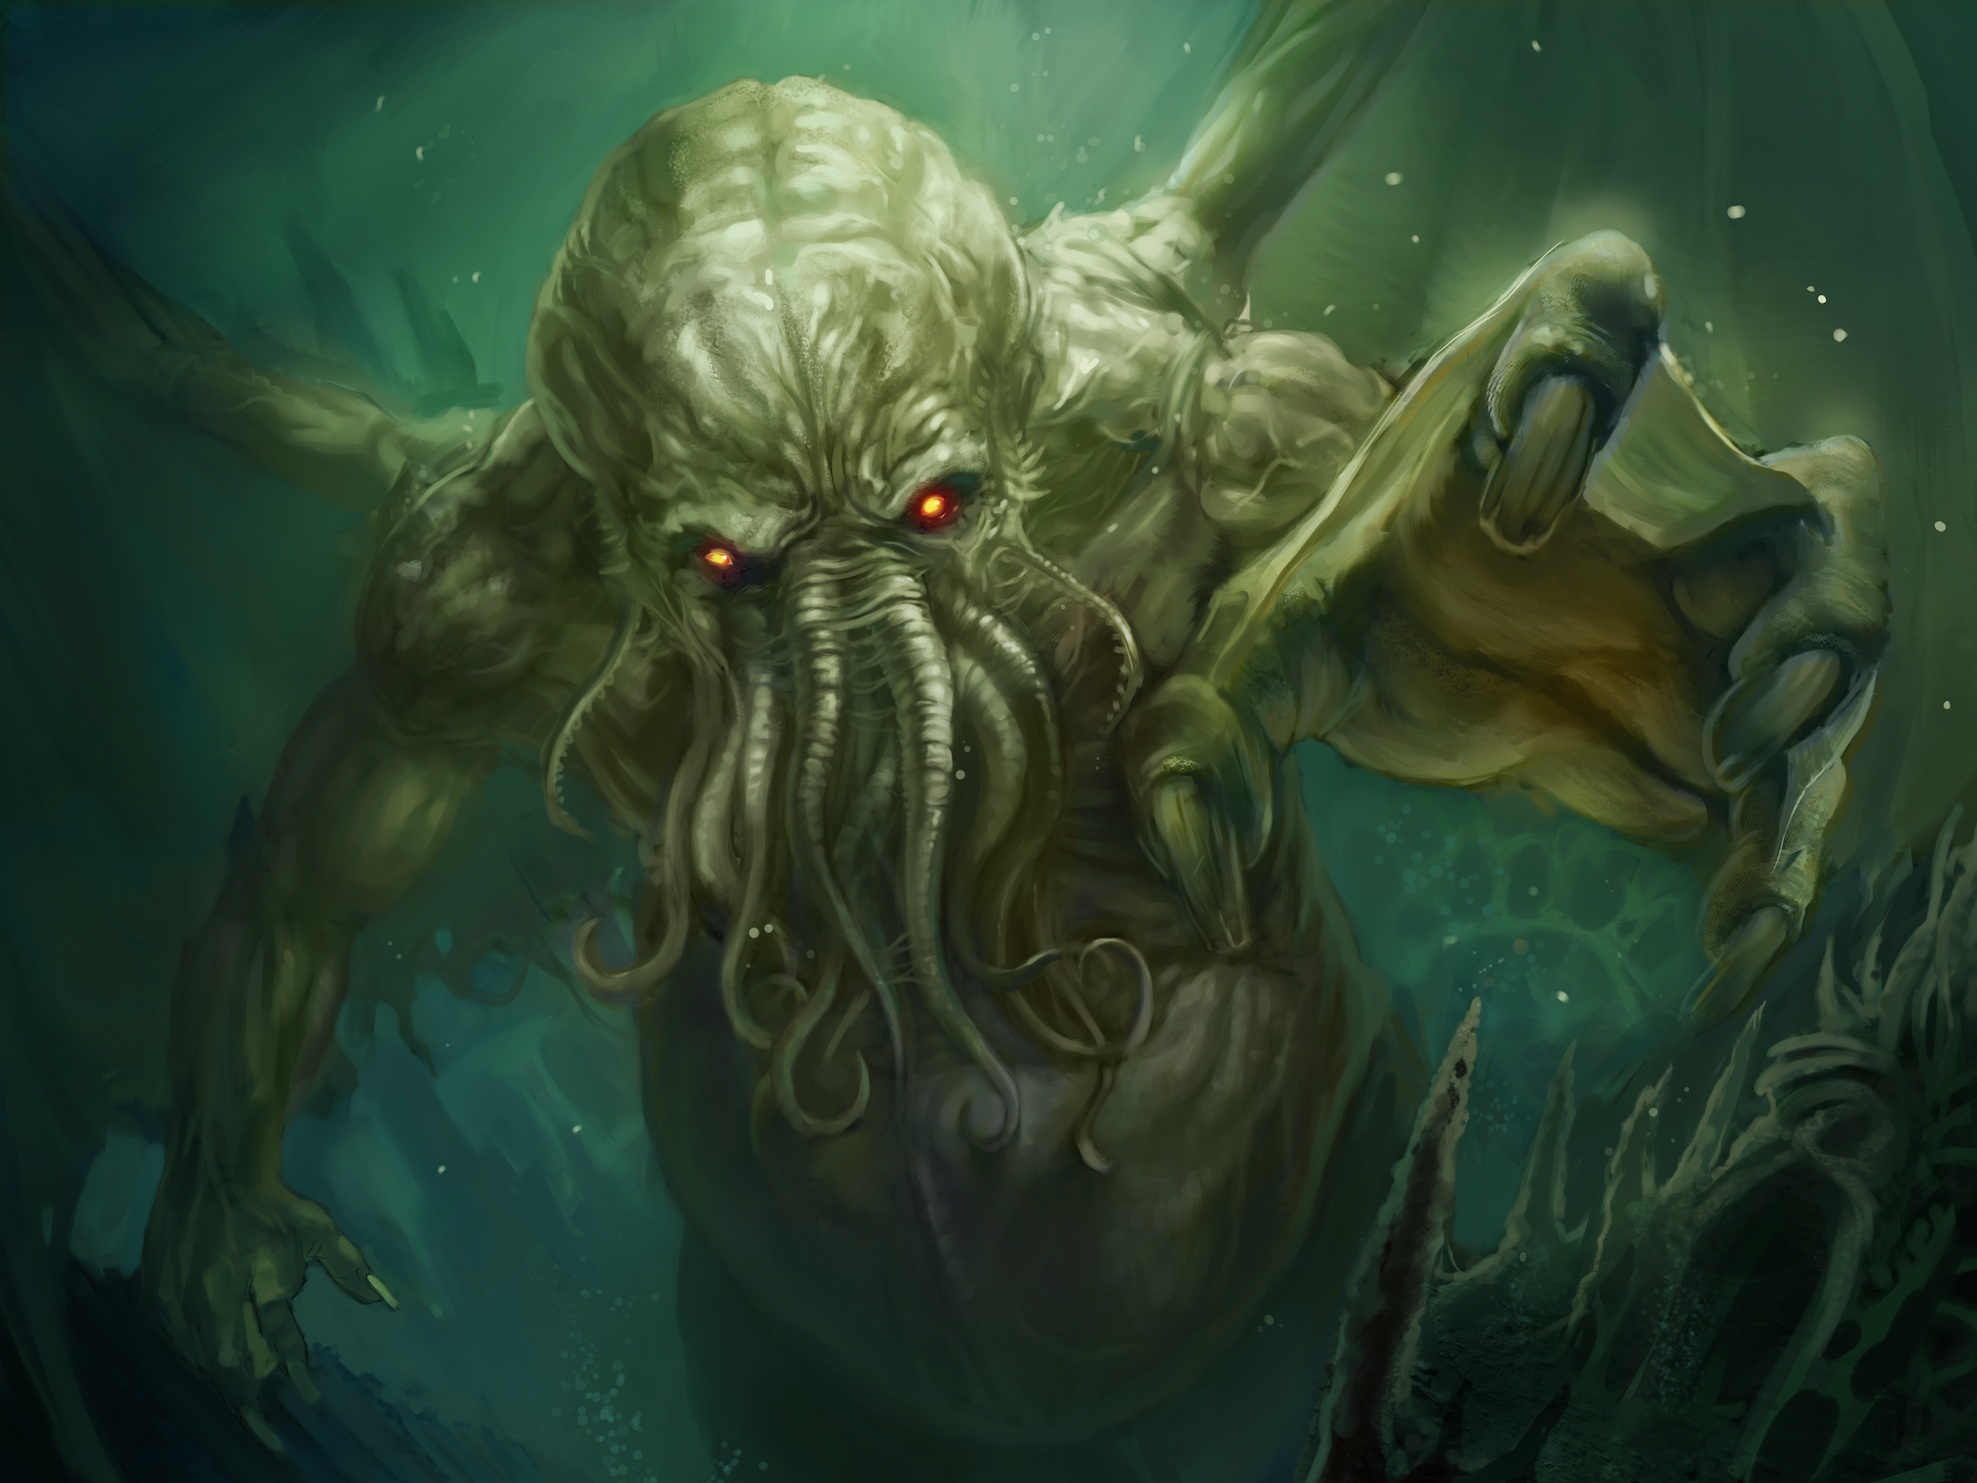 https://static.wikia.nocookie.net/lovecraft/images/7/72/Lovecraft-cthulhu.jpg/revision/latest?cb=20140210145556&path-prefix=es